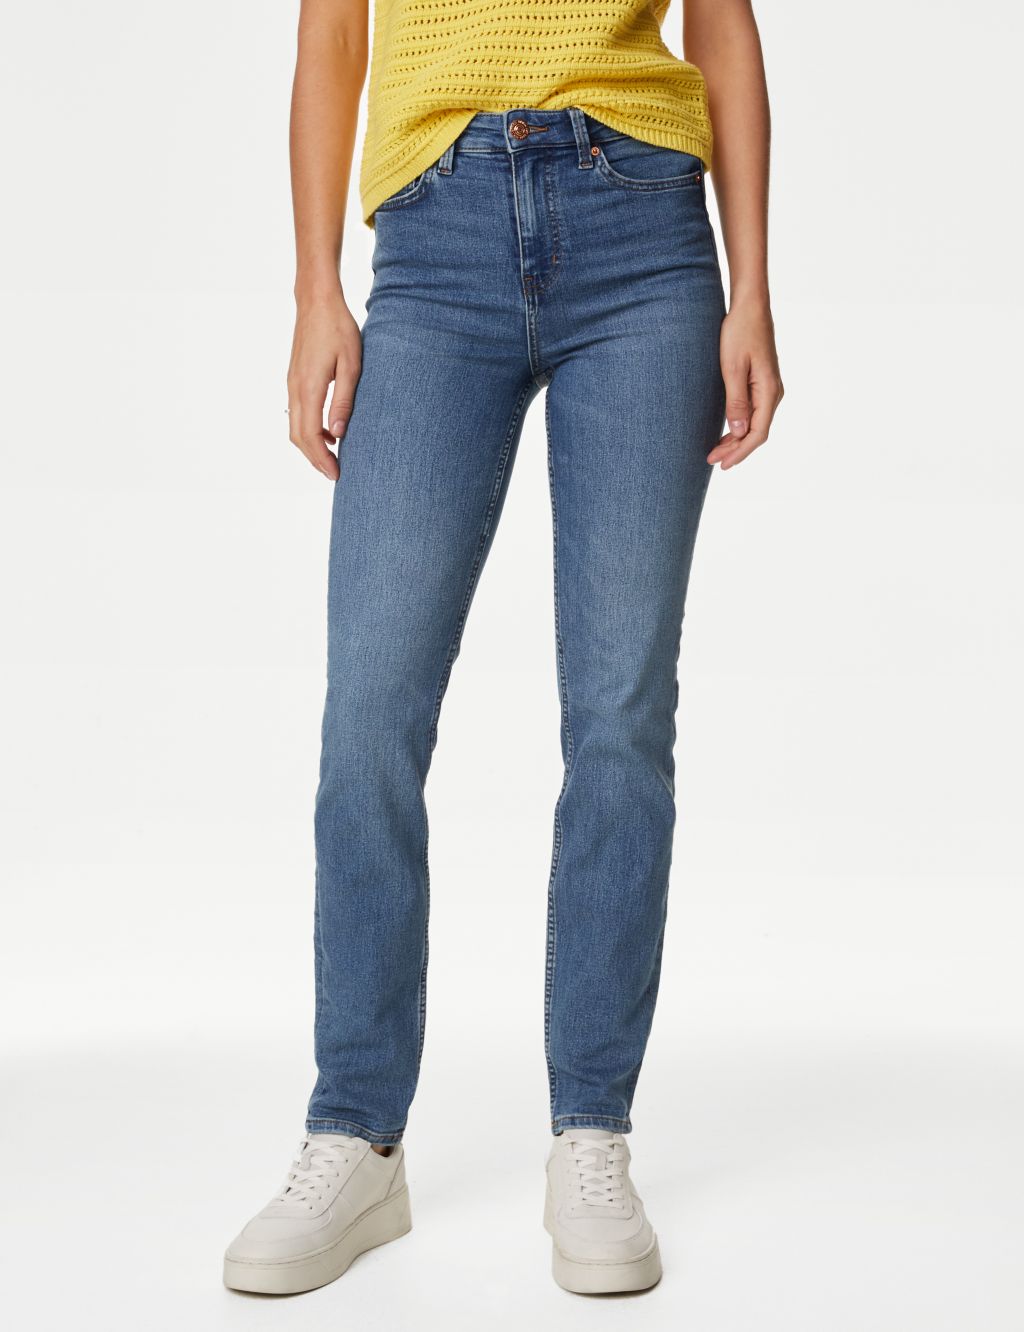 Sienna Straight Leg Jeans with Stretch image 3